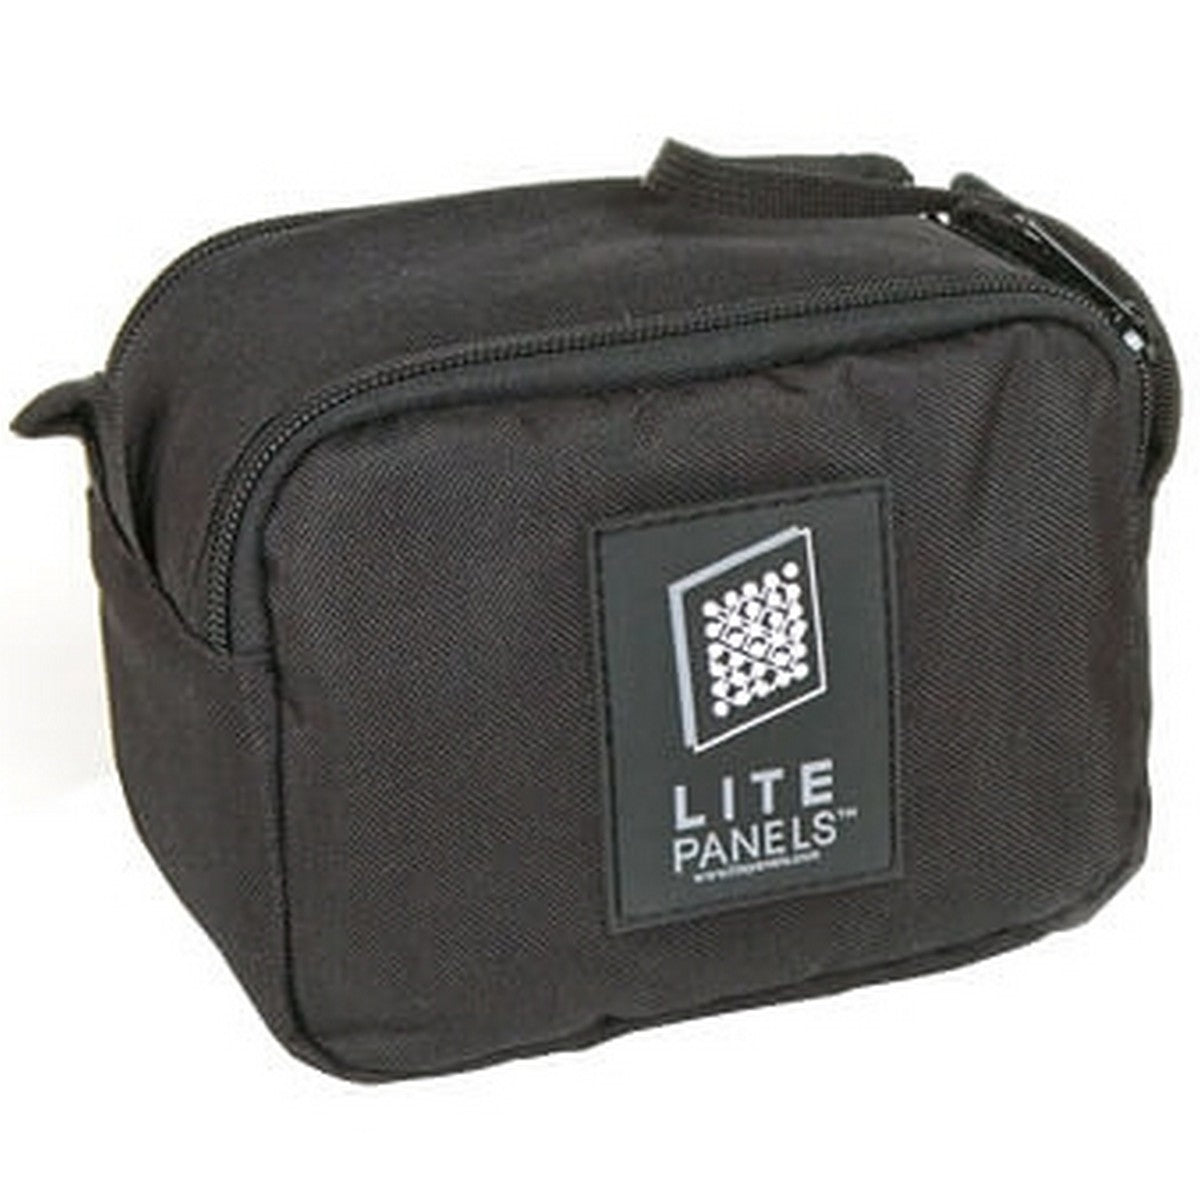 Litepanels Carrying Case | Case for Sola ENG MicroPro Croma Luma 900-0015